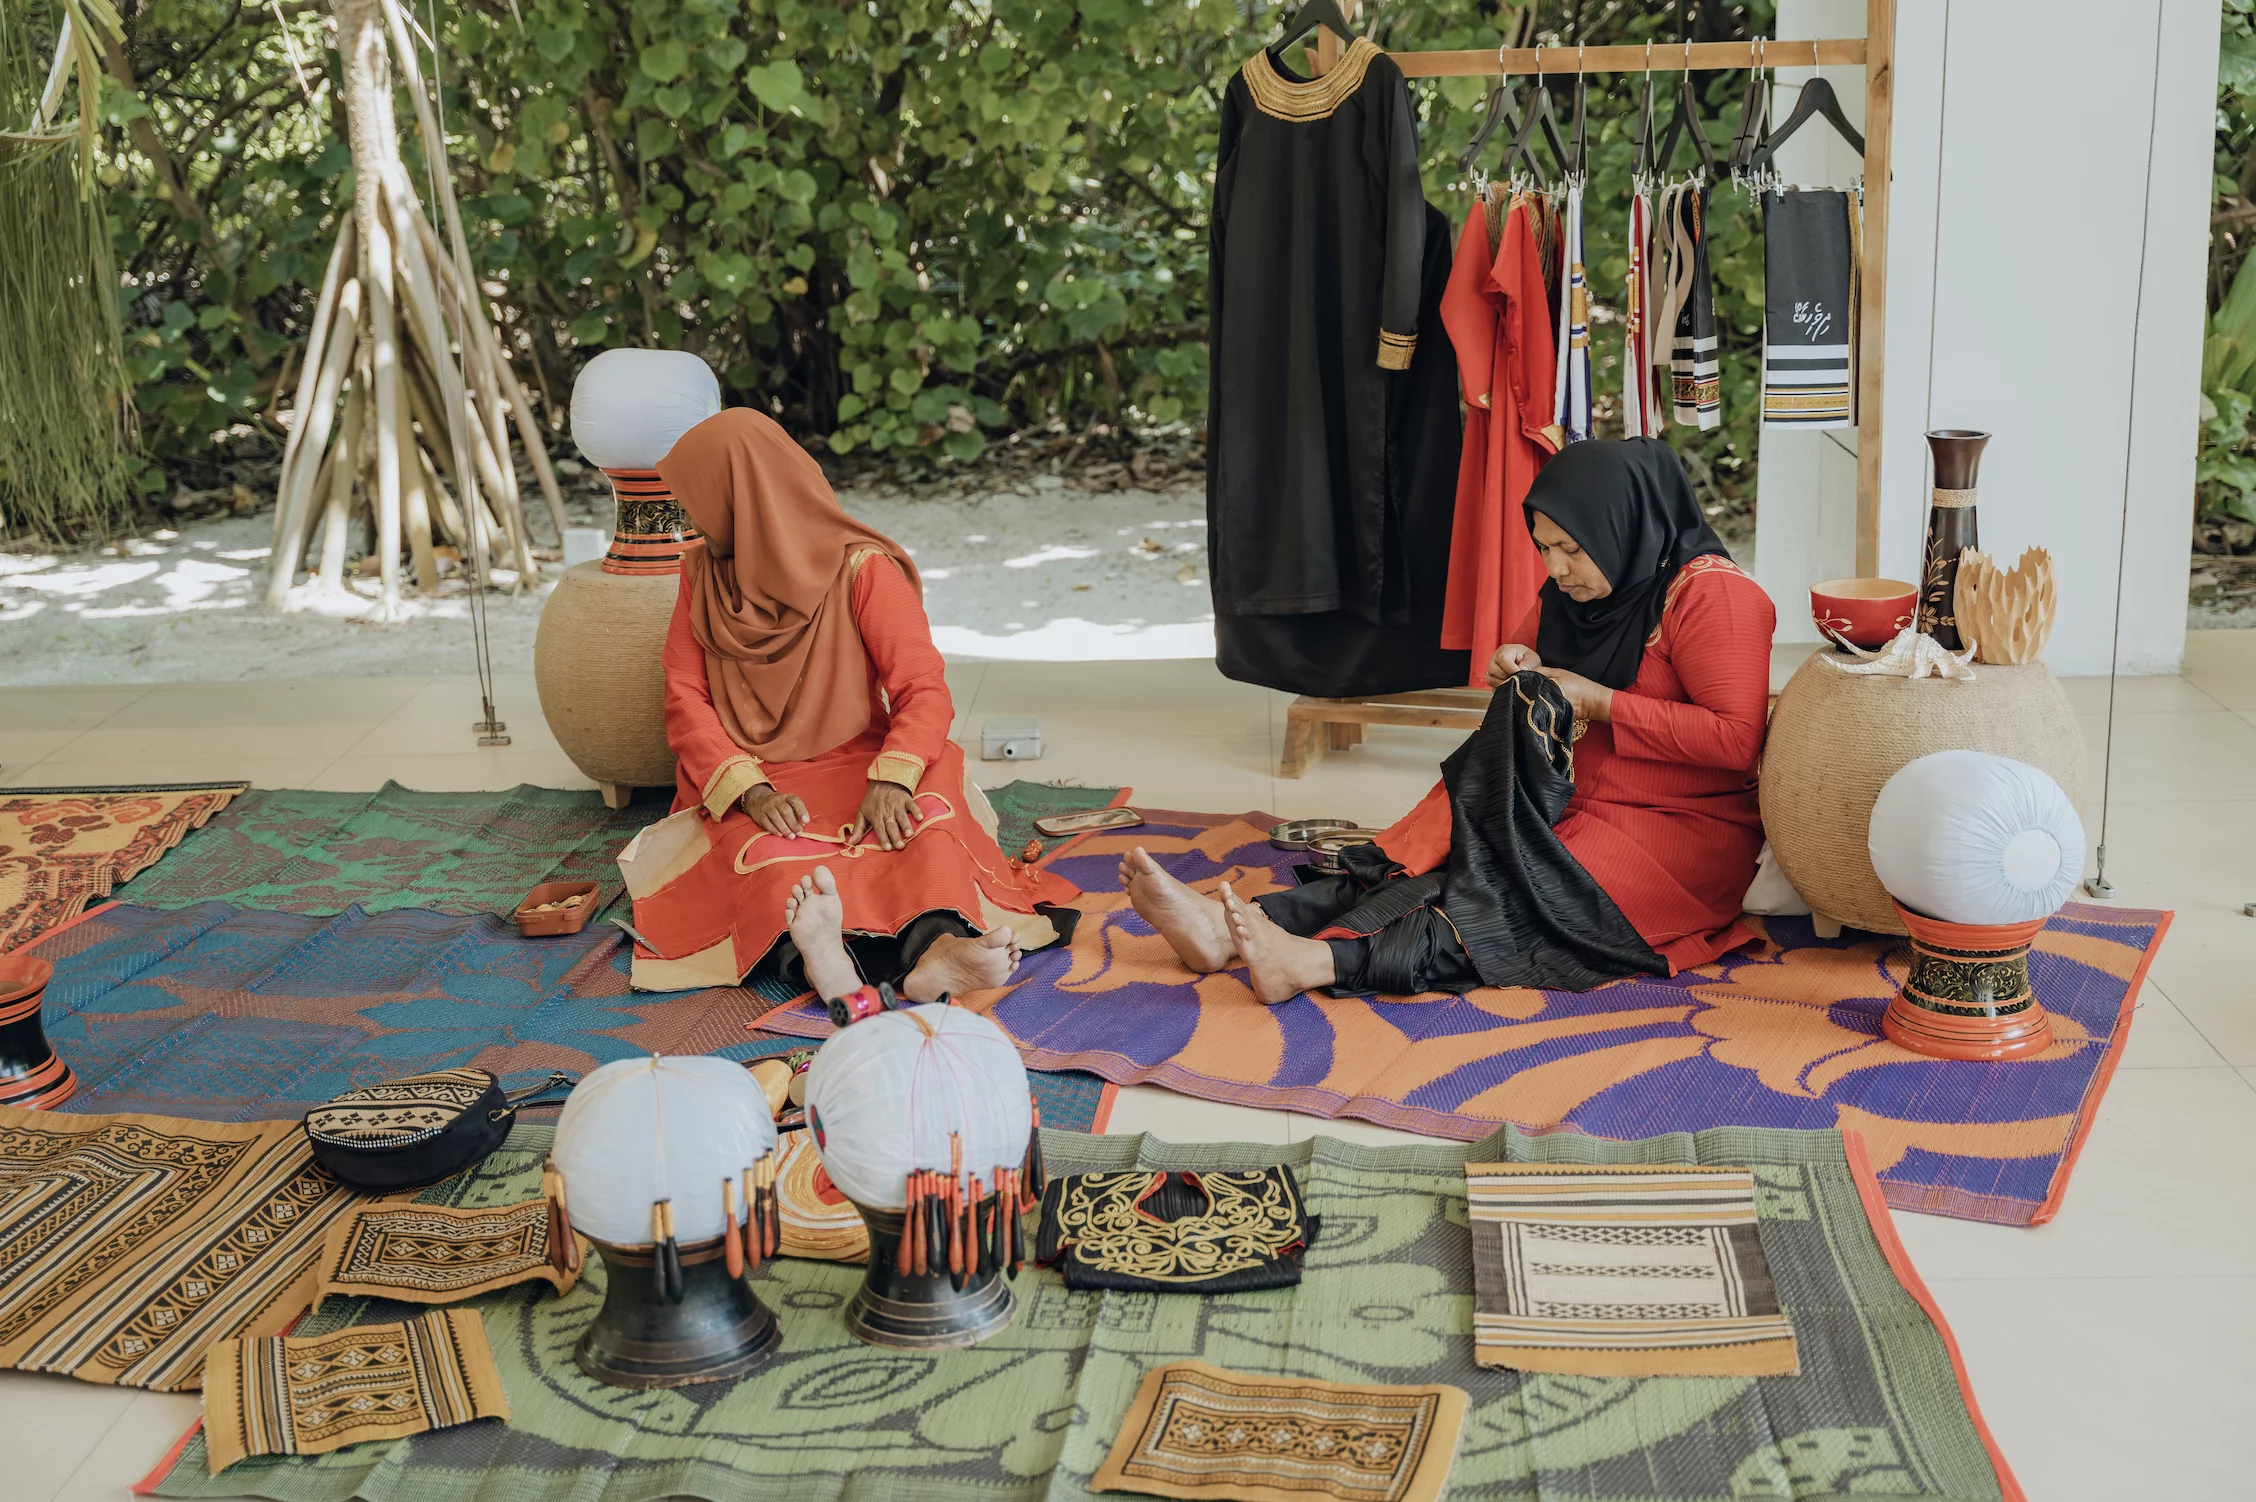 traditional-Maldivian-craft-exhibted-by-local-ladies-at-a-resort-island